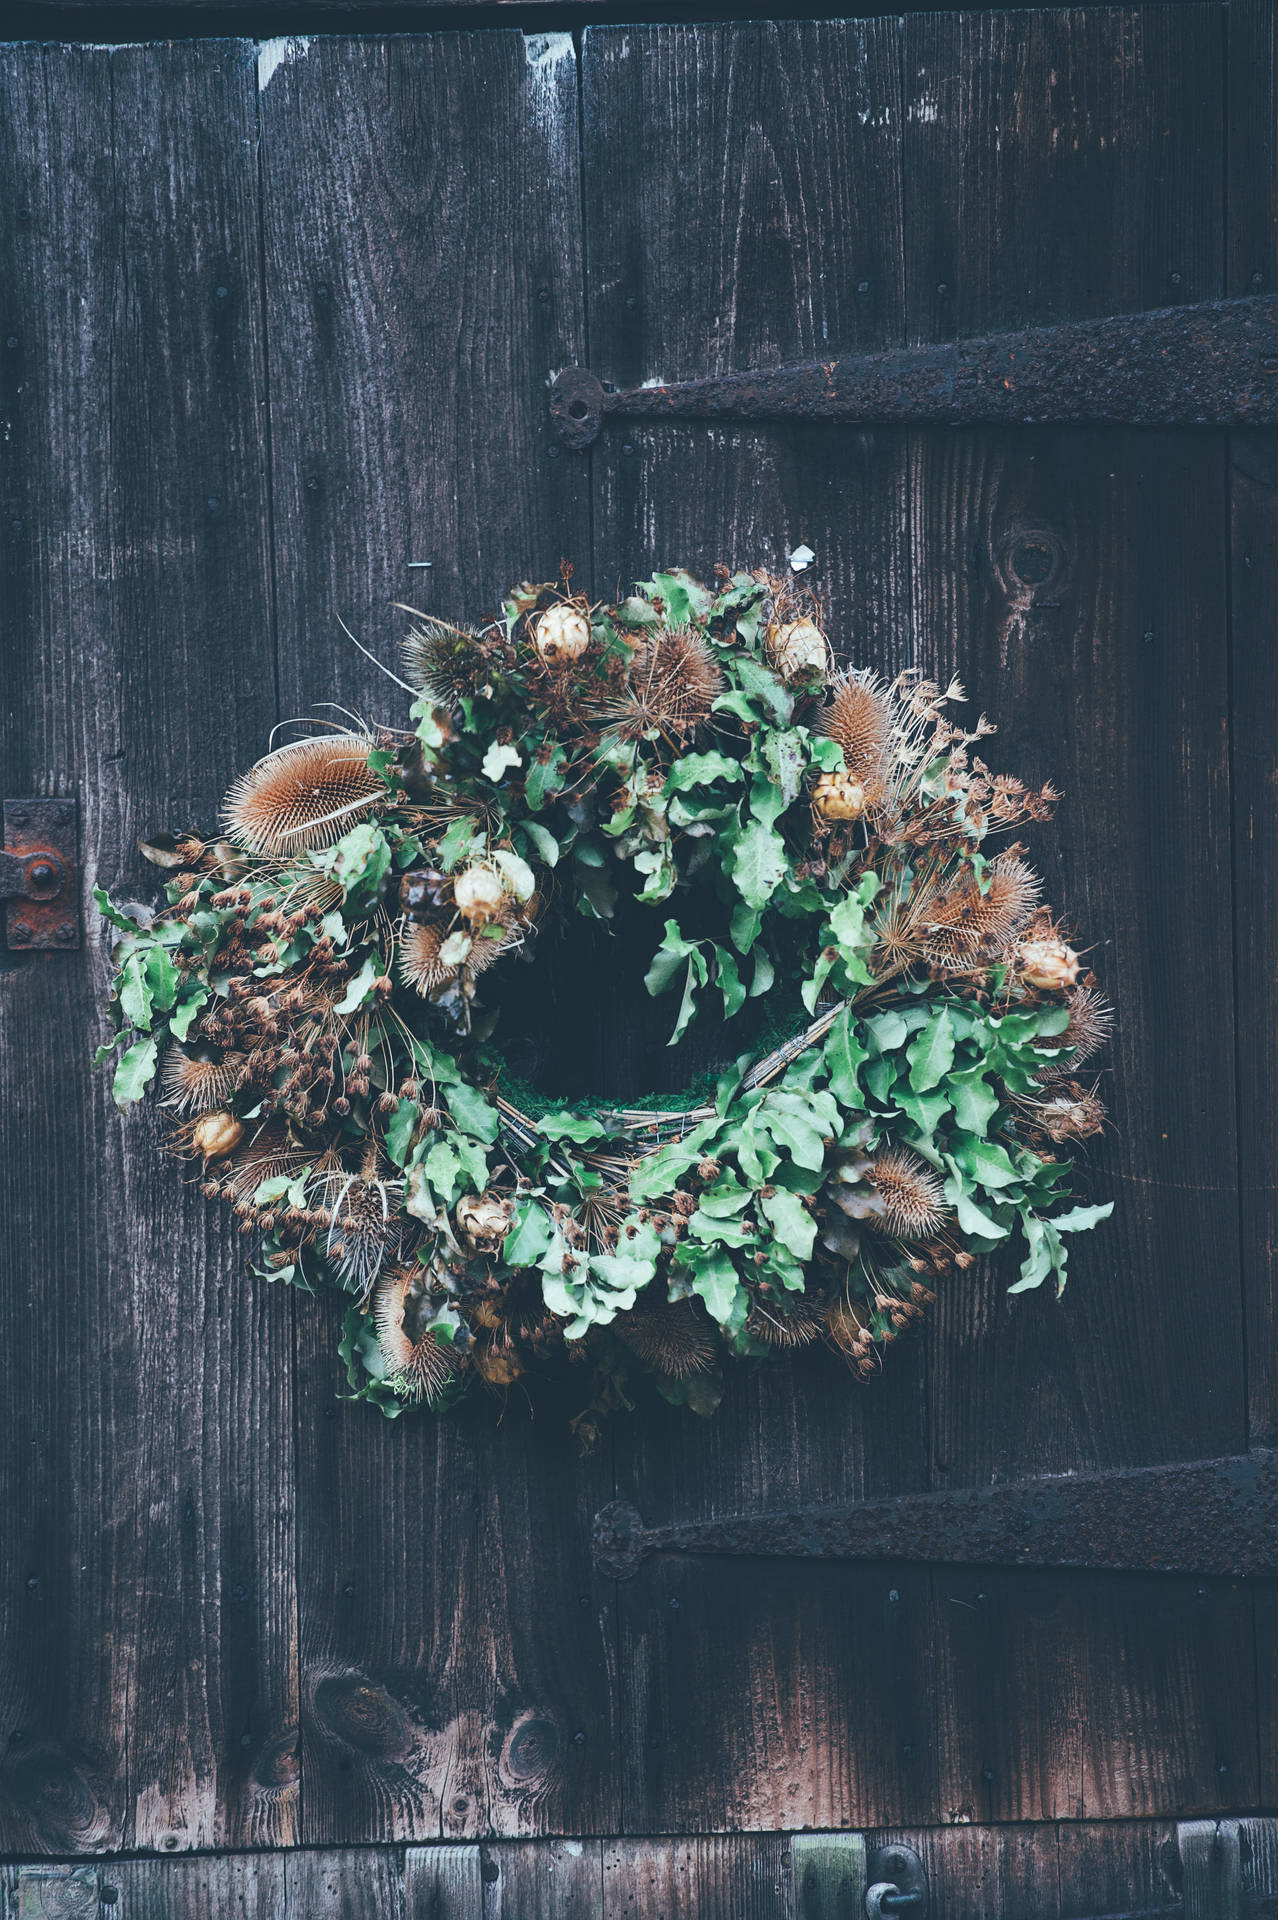 Rustic Christmas Wreath adding charm to the holiday ambiance Wallpaper